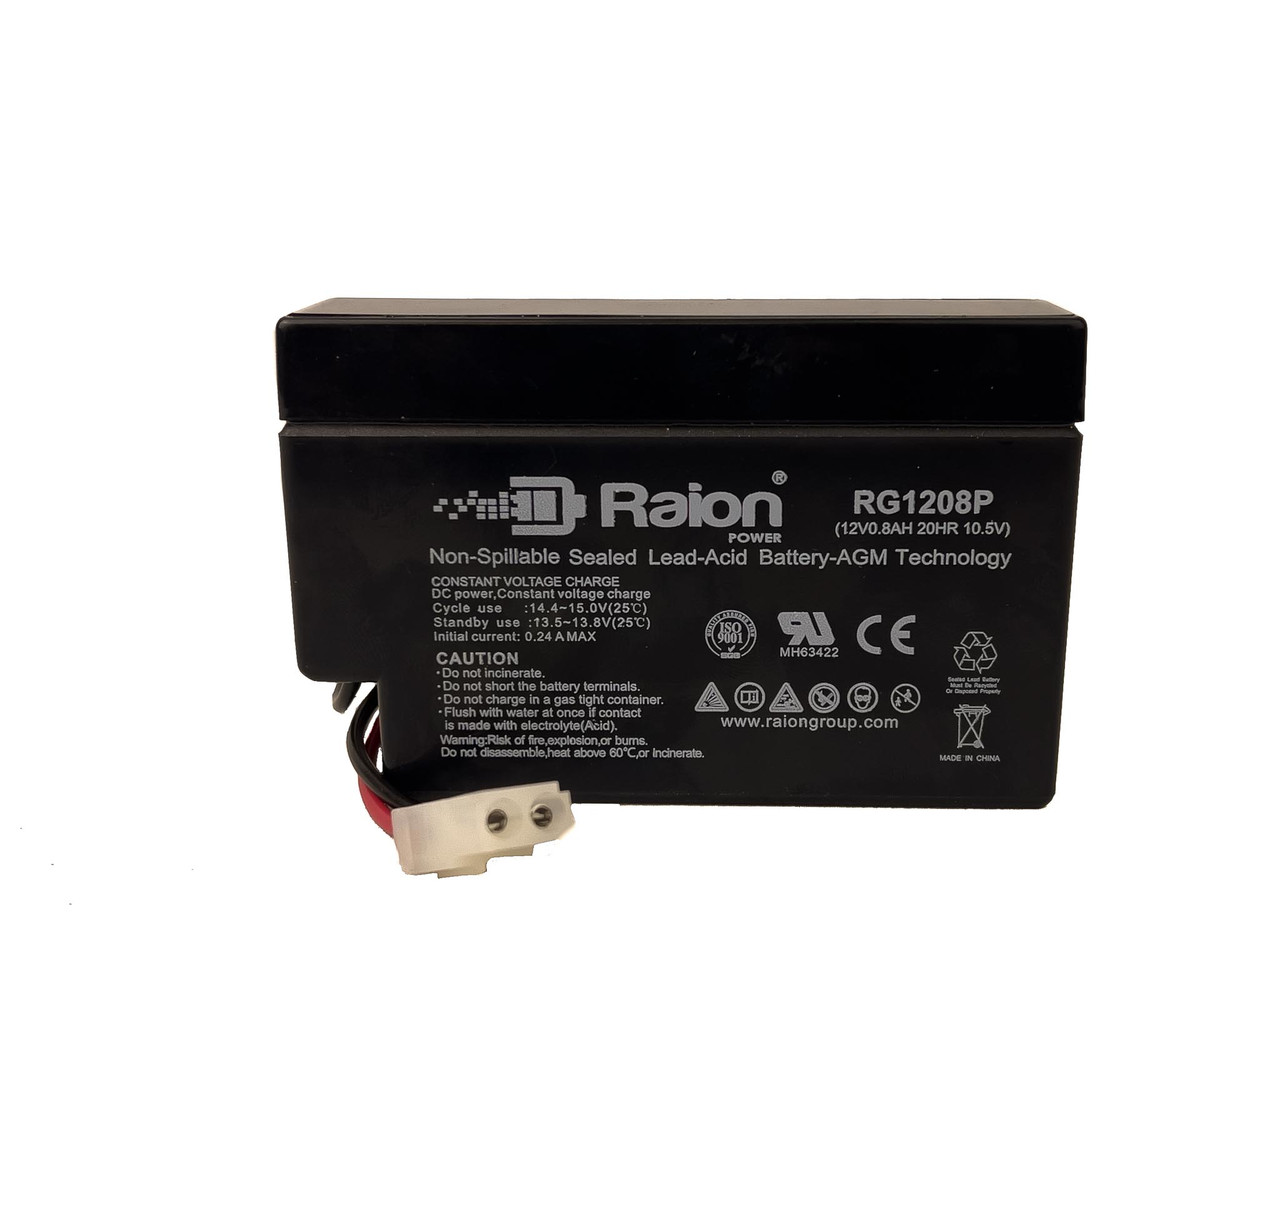 Raion Power 12V 0.8Ah SLA Battery With T1 Terminals For Napel NP1208